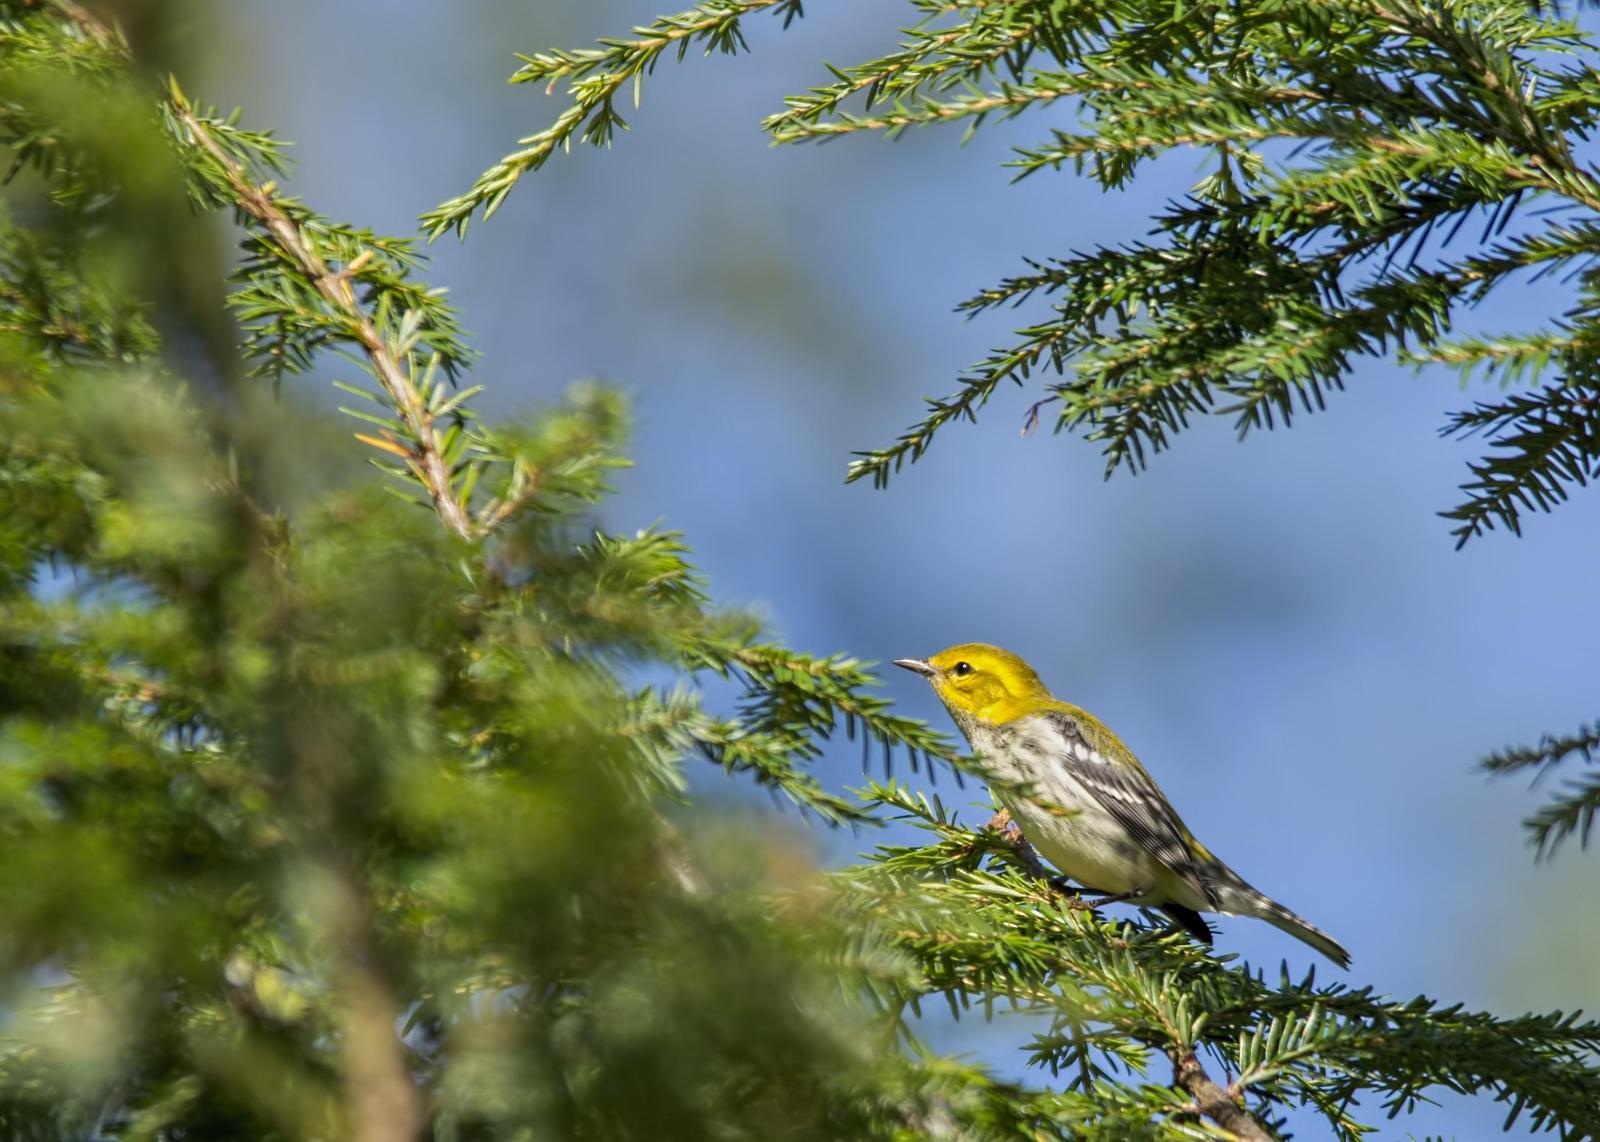 Black-throated Green Warbler Photo by Tracy Patterson